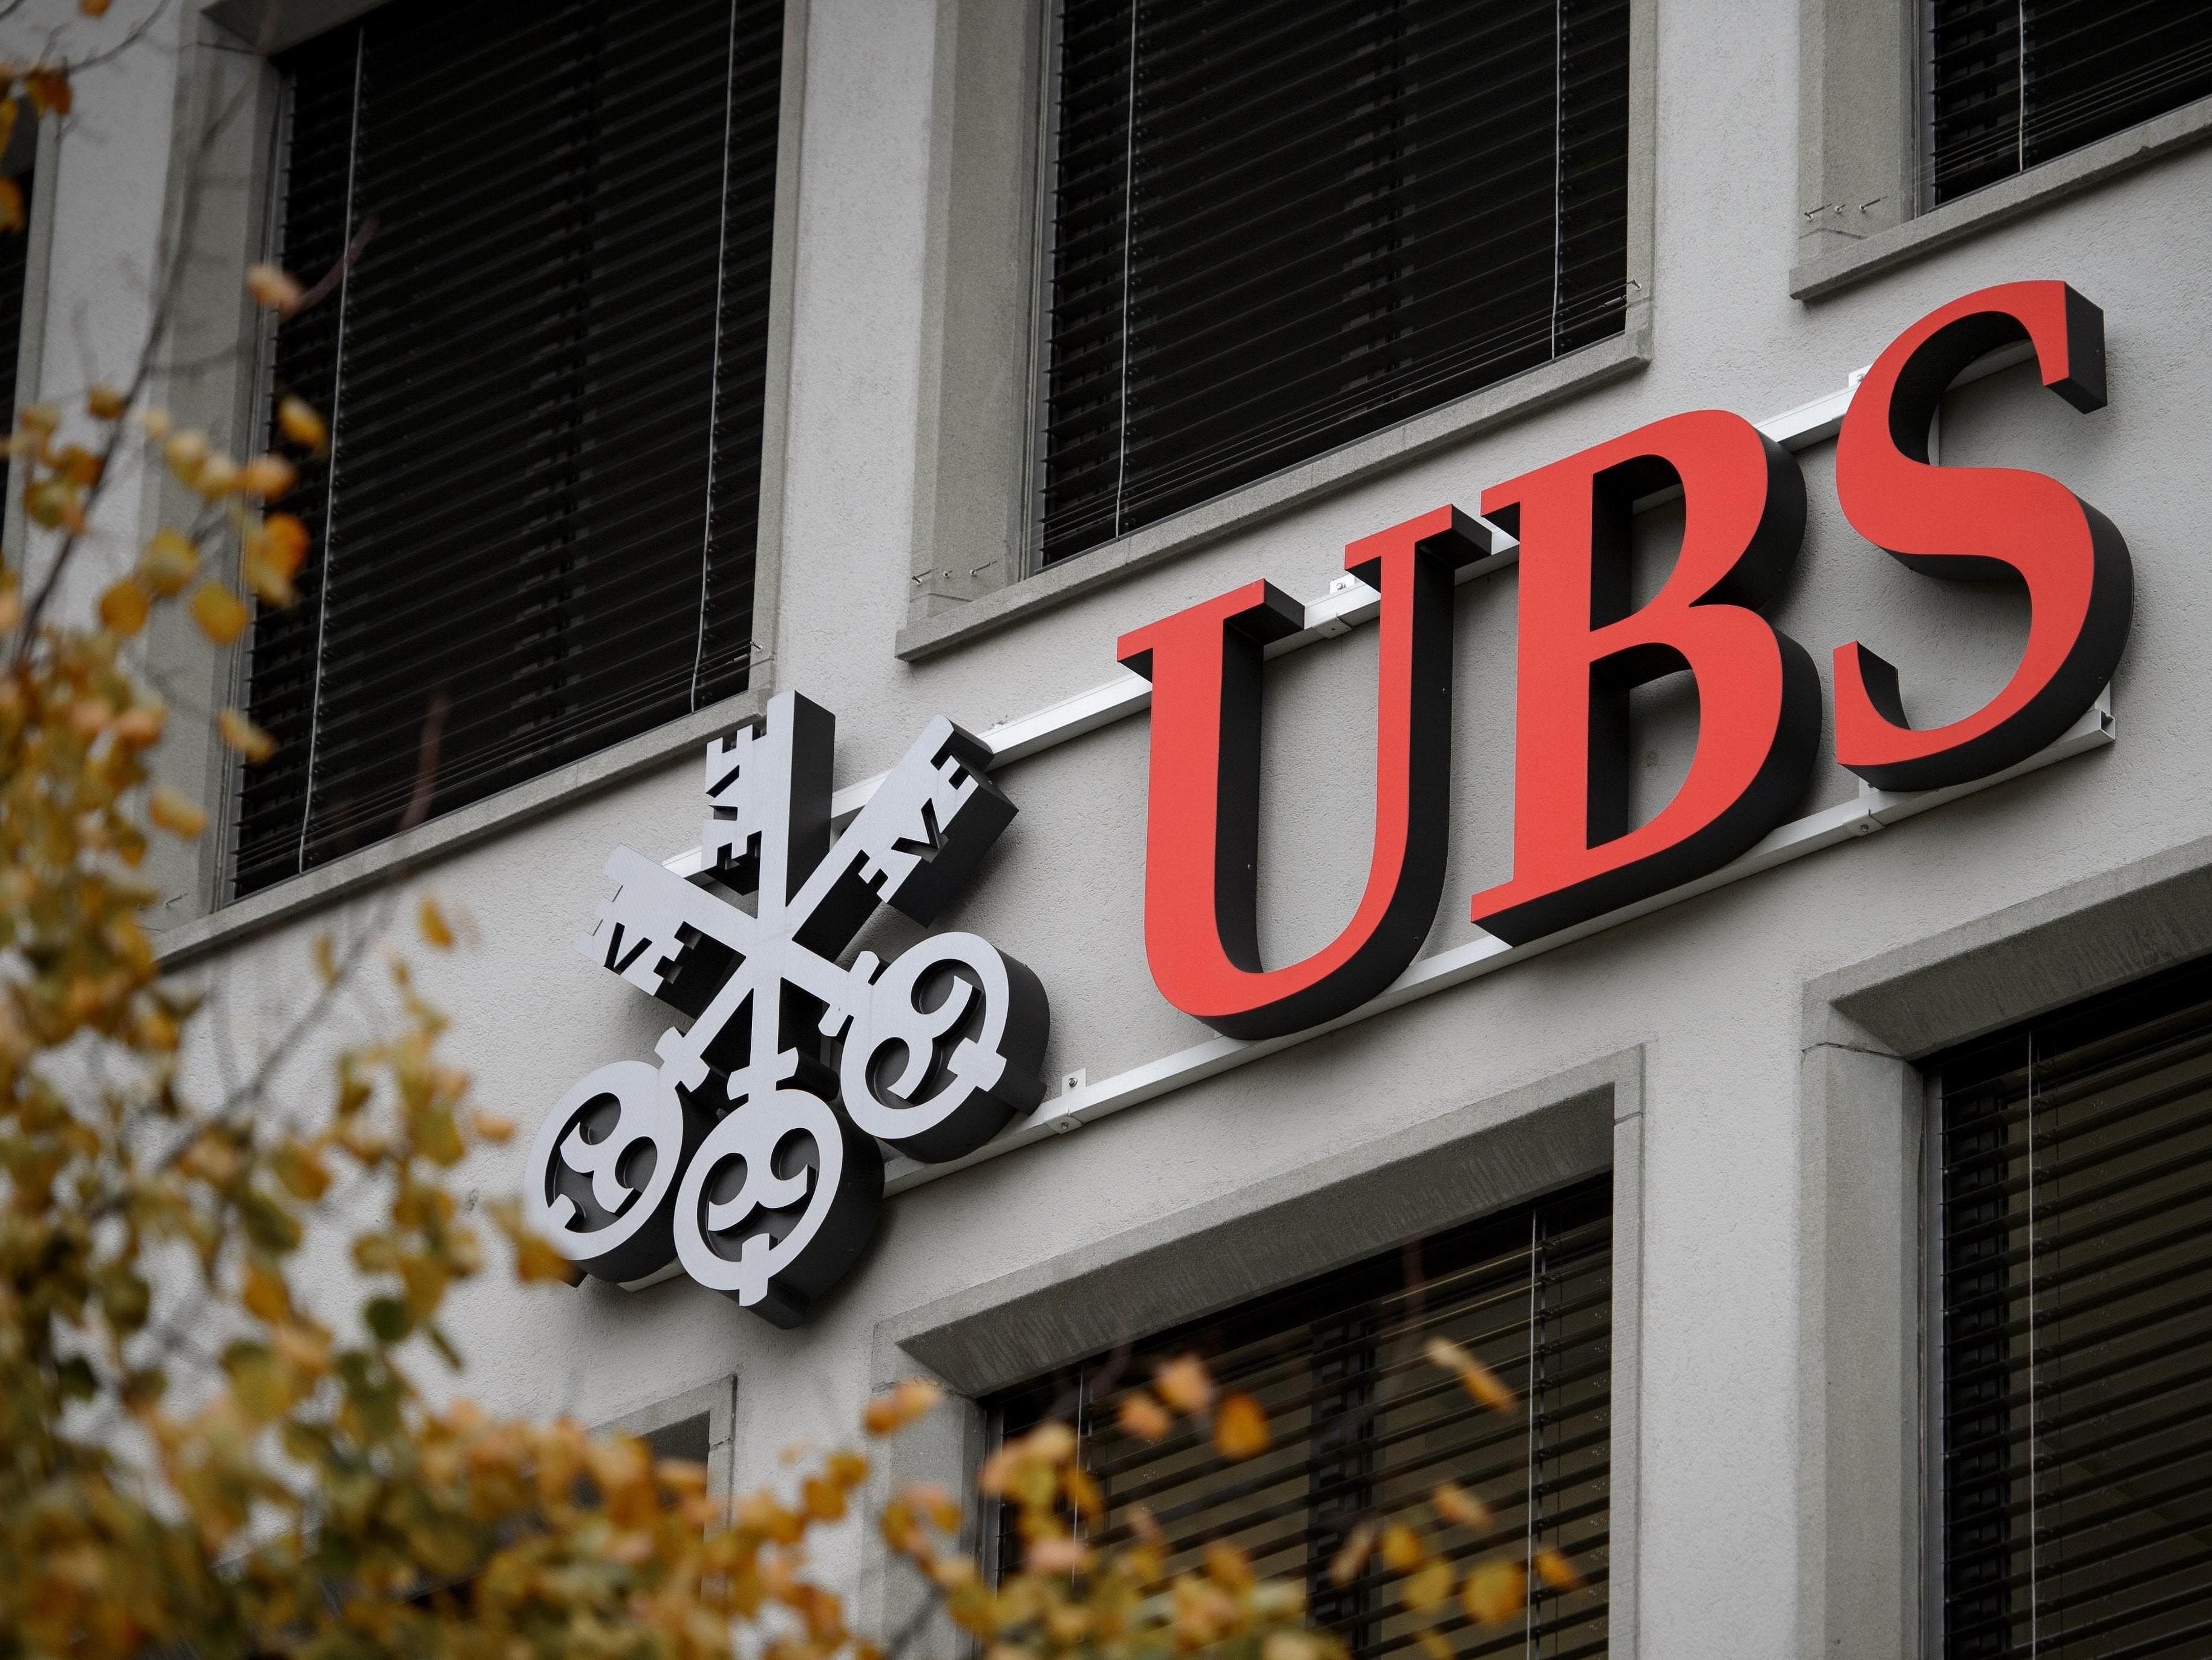  bitcoin fiat swiss ubs able role future 